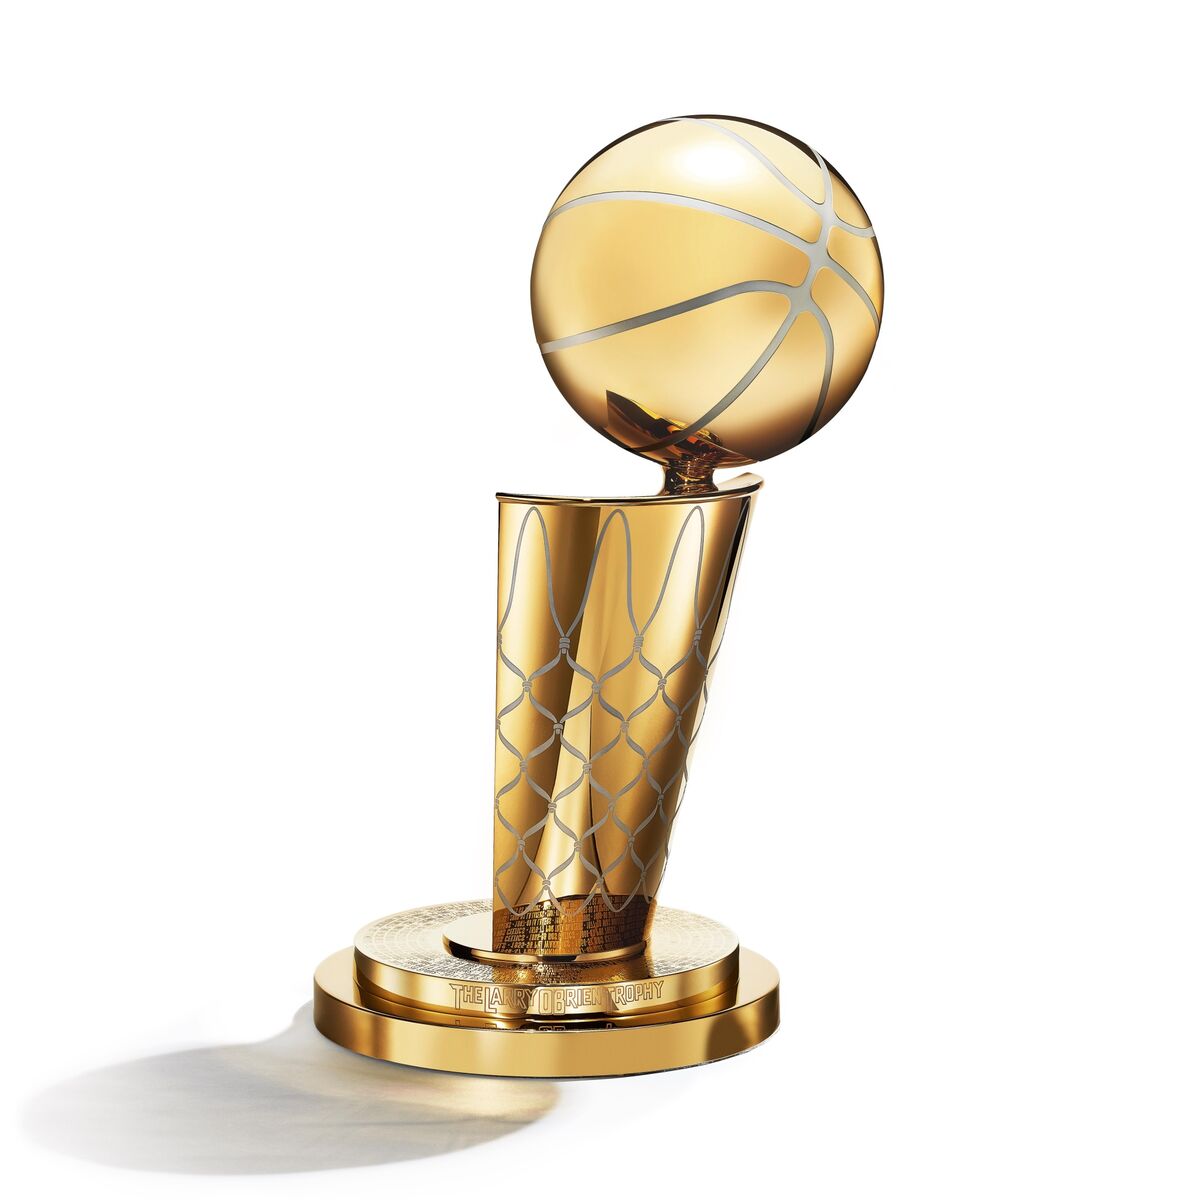 Larry O'Brien NBA Championship Trophy By Tiffany Is Redesigned: New - Bloomberg